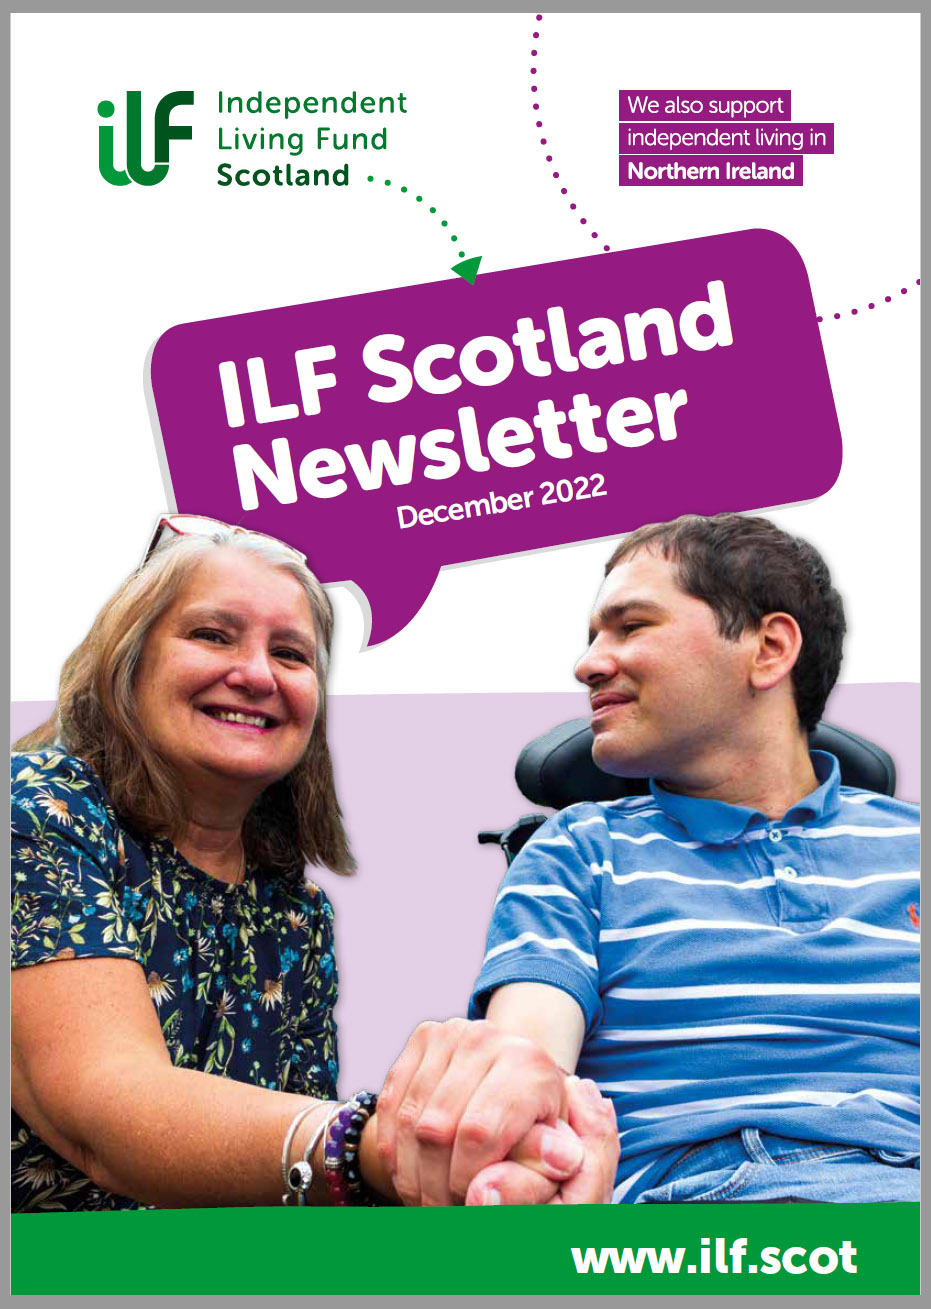 Cover image showing woman and her son holding hands. At the top of the cover is the ILF Scotland logo and the words "We also support independent living in Northern Ireland". In a purple quote graphic in the centre of the page are the words "ILF Scotland Newsletter December 2022". At the bottom of the page is a link to the website www.ilf.scot